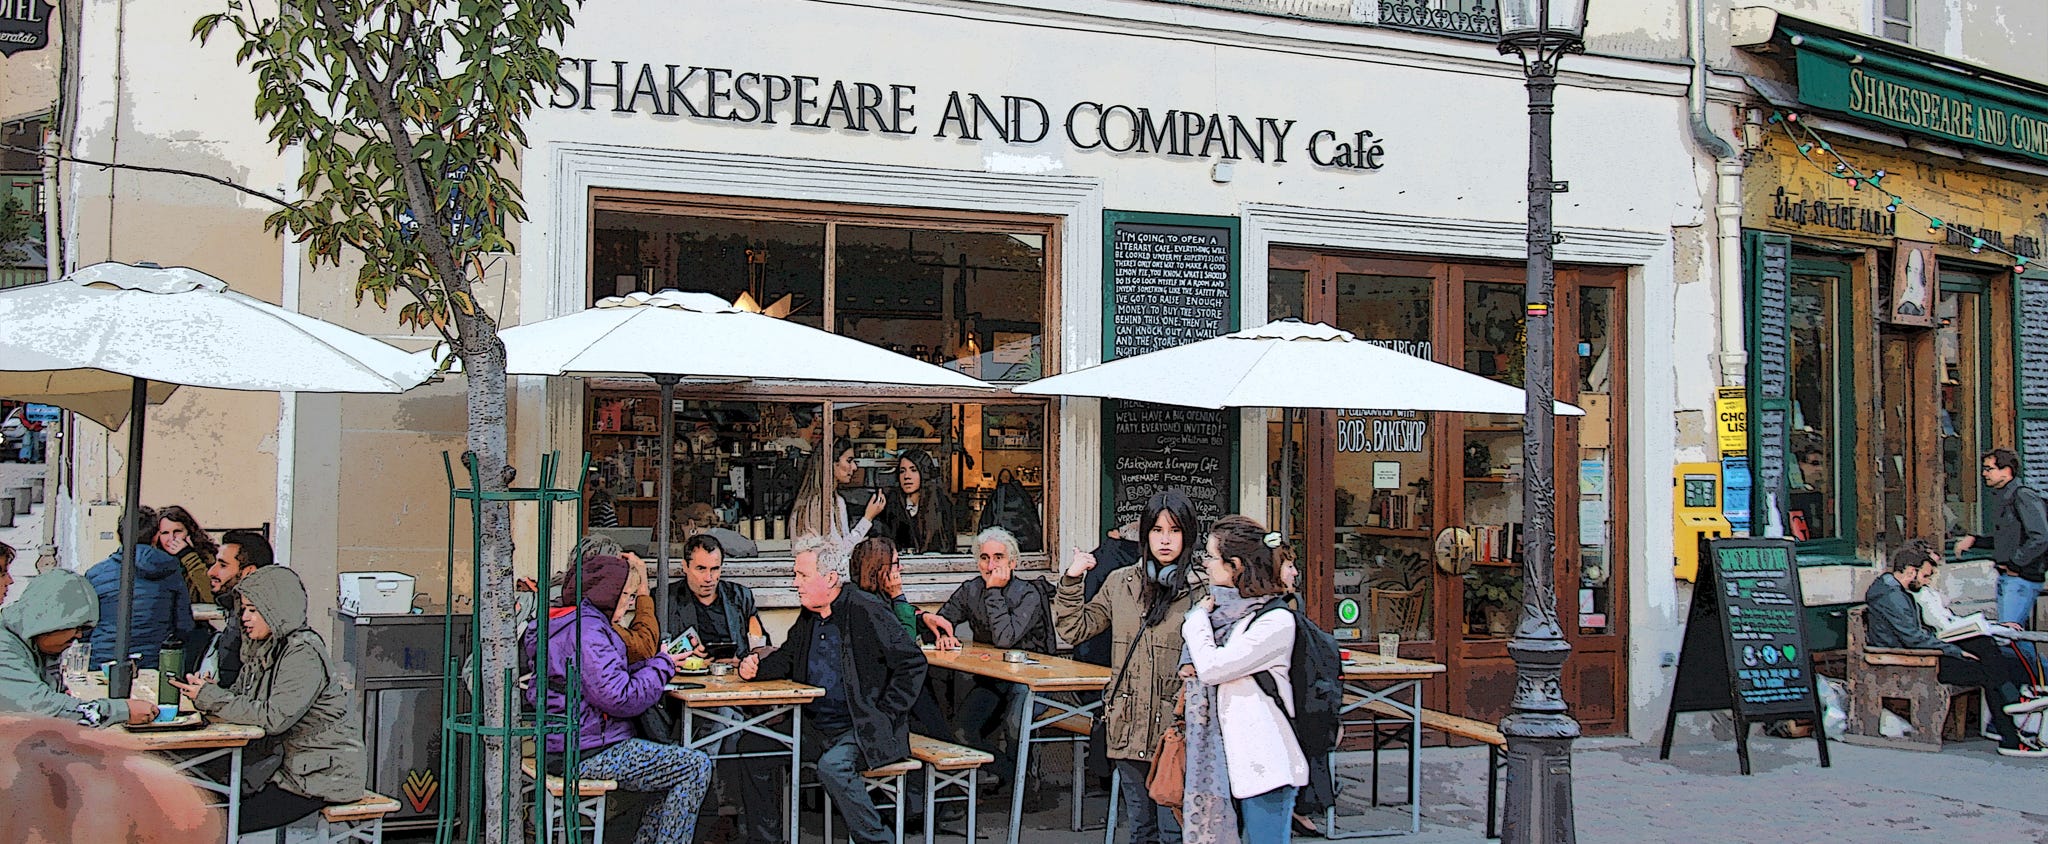 Shakespeare and Company Bookstore and Cafe in Paris, France - one of the literary pilgrimage sites in the world.